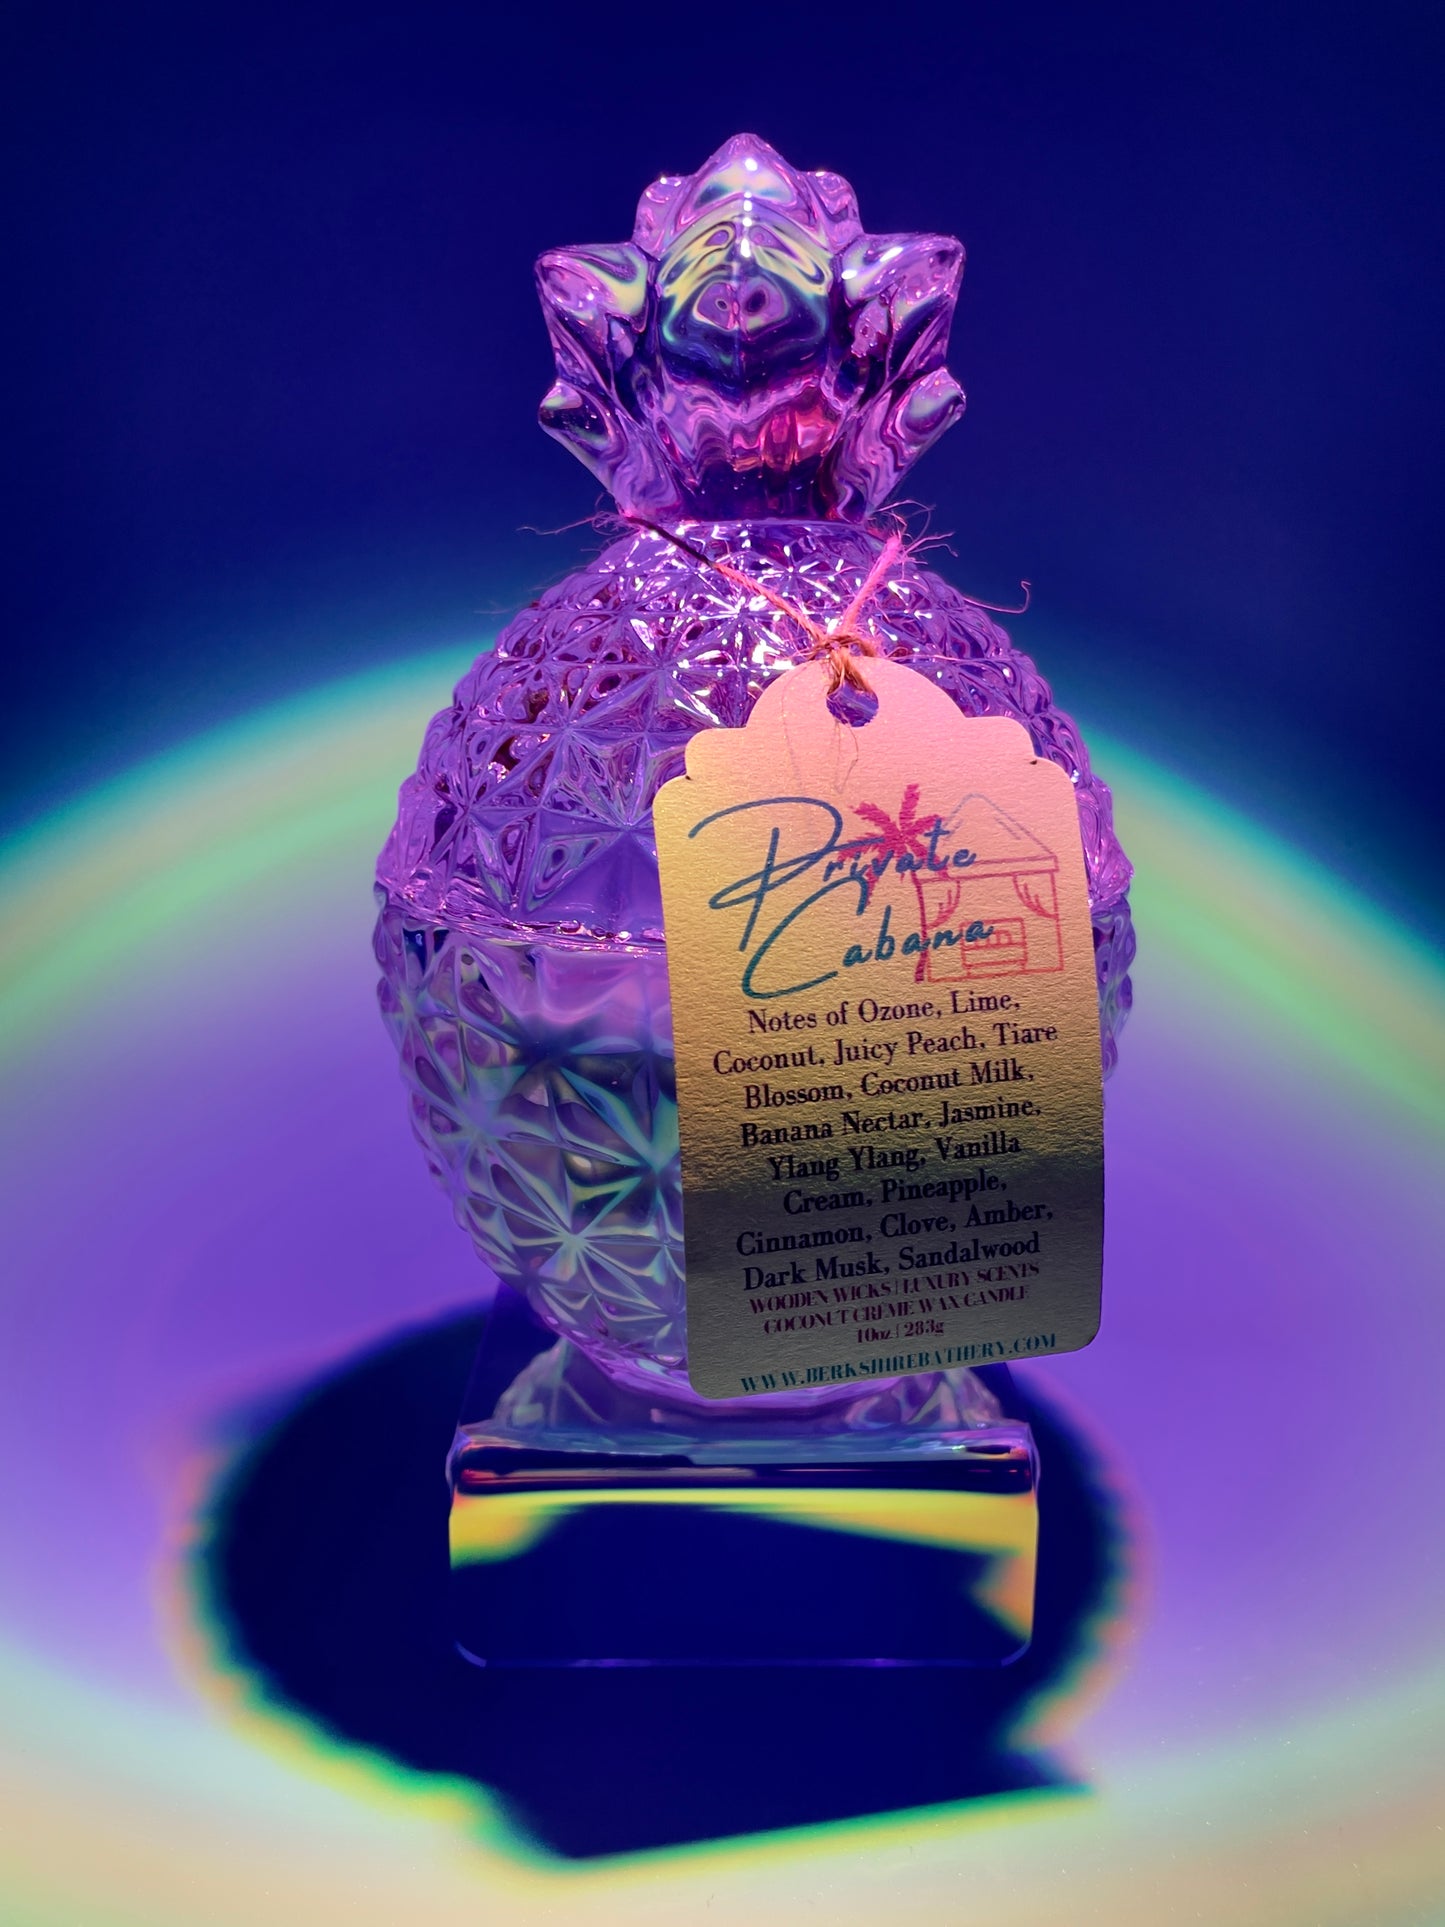 PRIVATE CABANA - Holographic Glass Pineapple | 10 oz Two Piece Wood Wick Candle